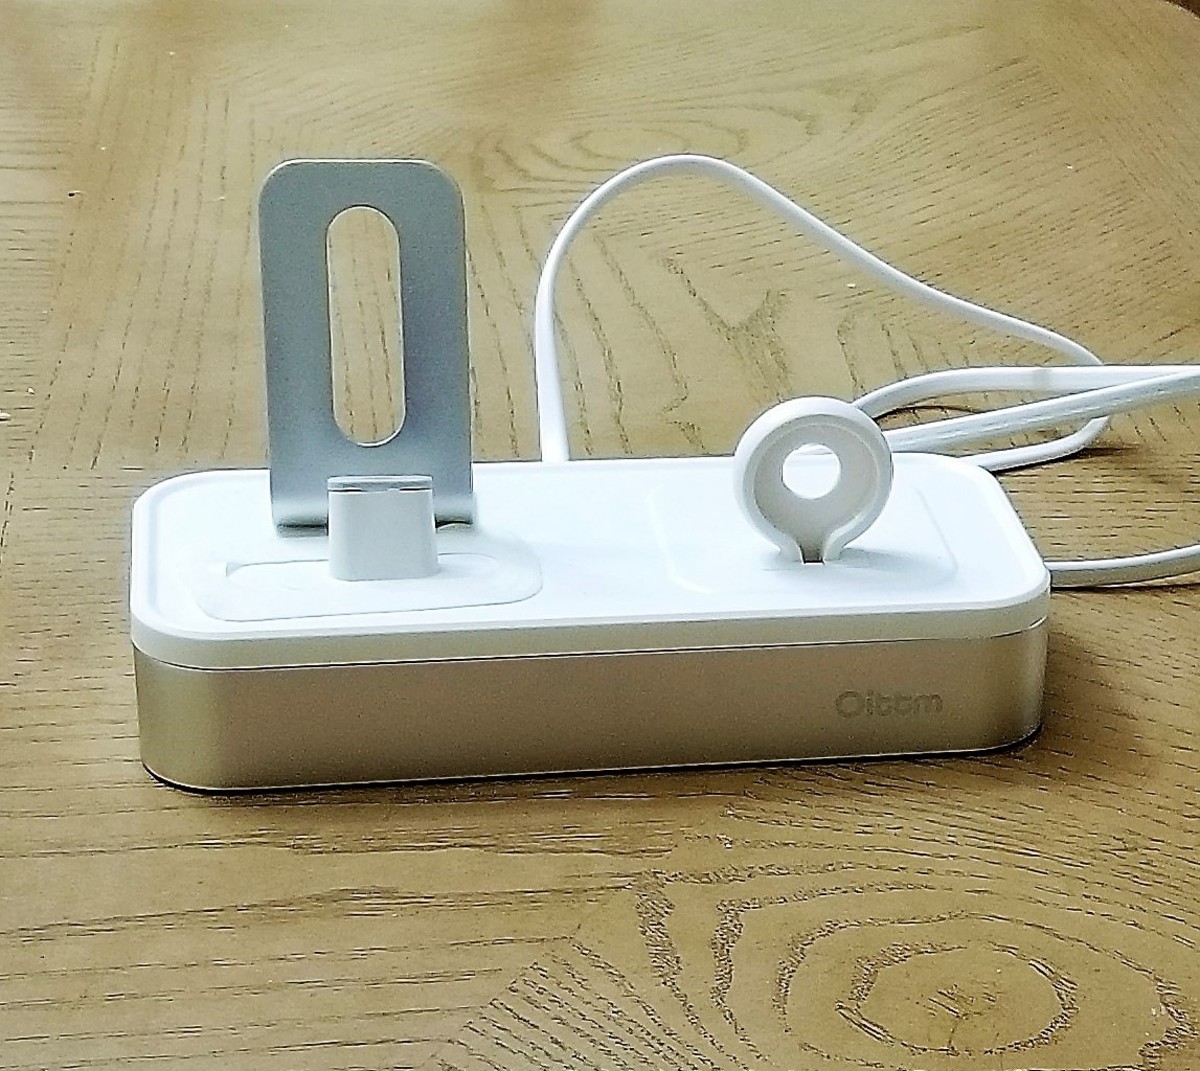 Review of Oittm 5-in-1 Apple Watch & iPhone Charging Stand